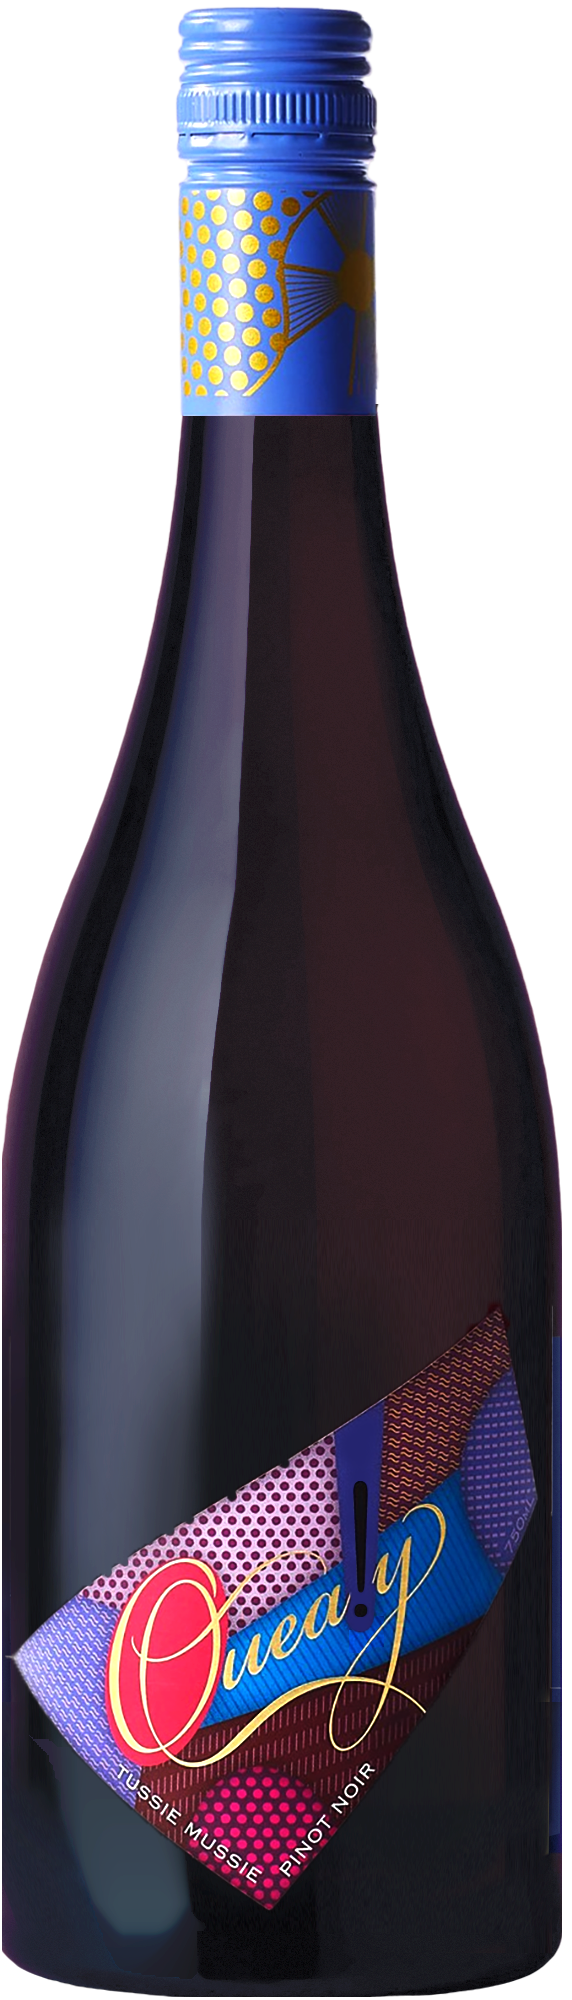 Quealy Tussie Mussie Pinot Noir 2022